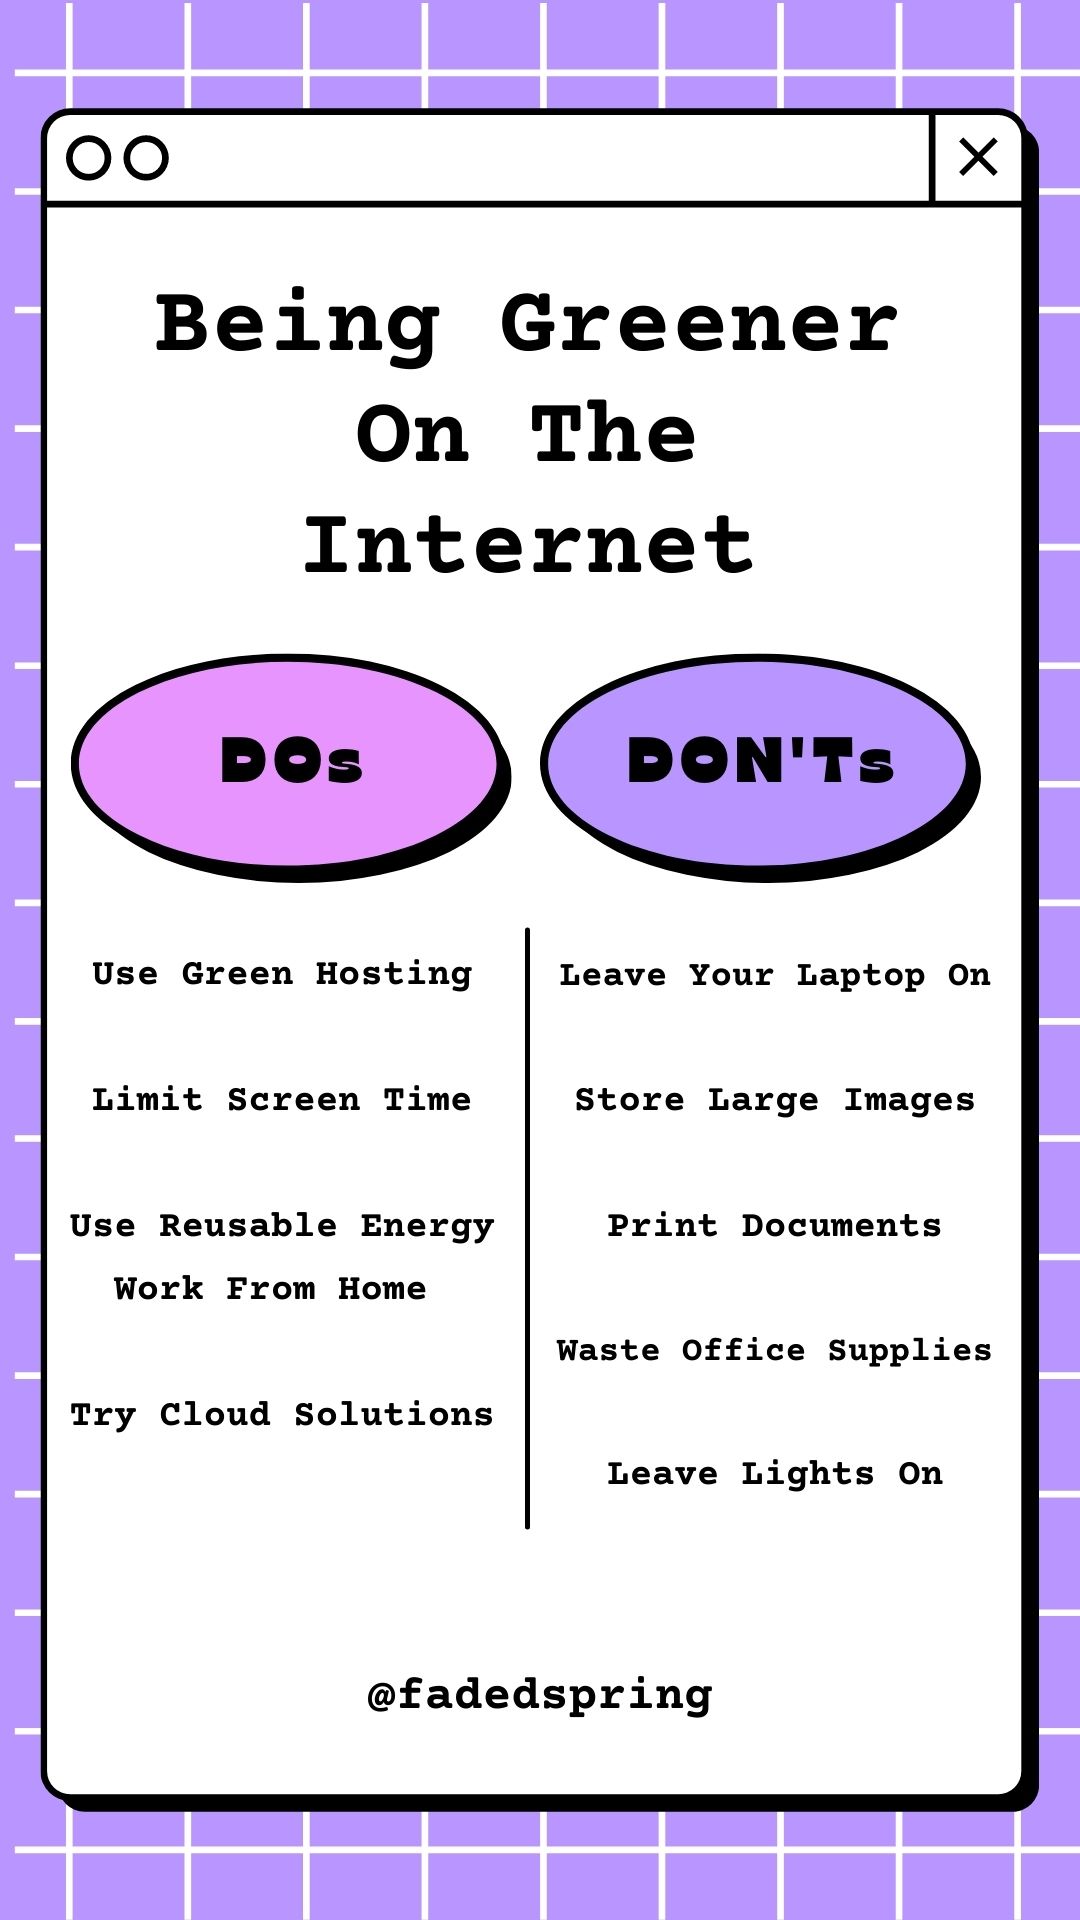 <img src="dos.jpg" alt="Dos and donts of using internet"/> 